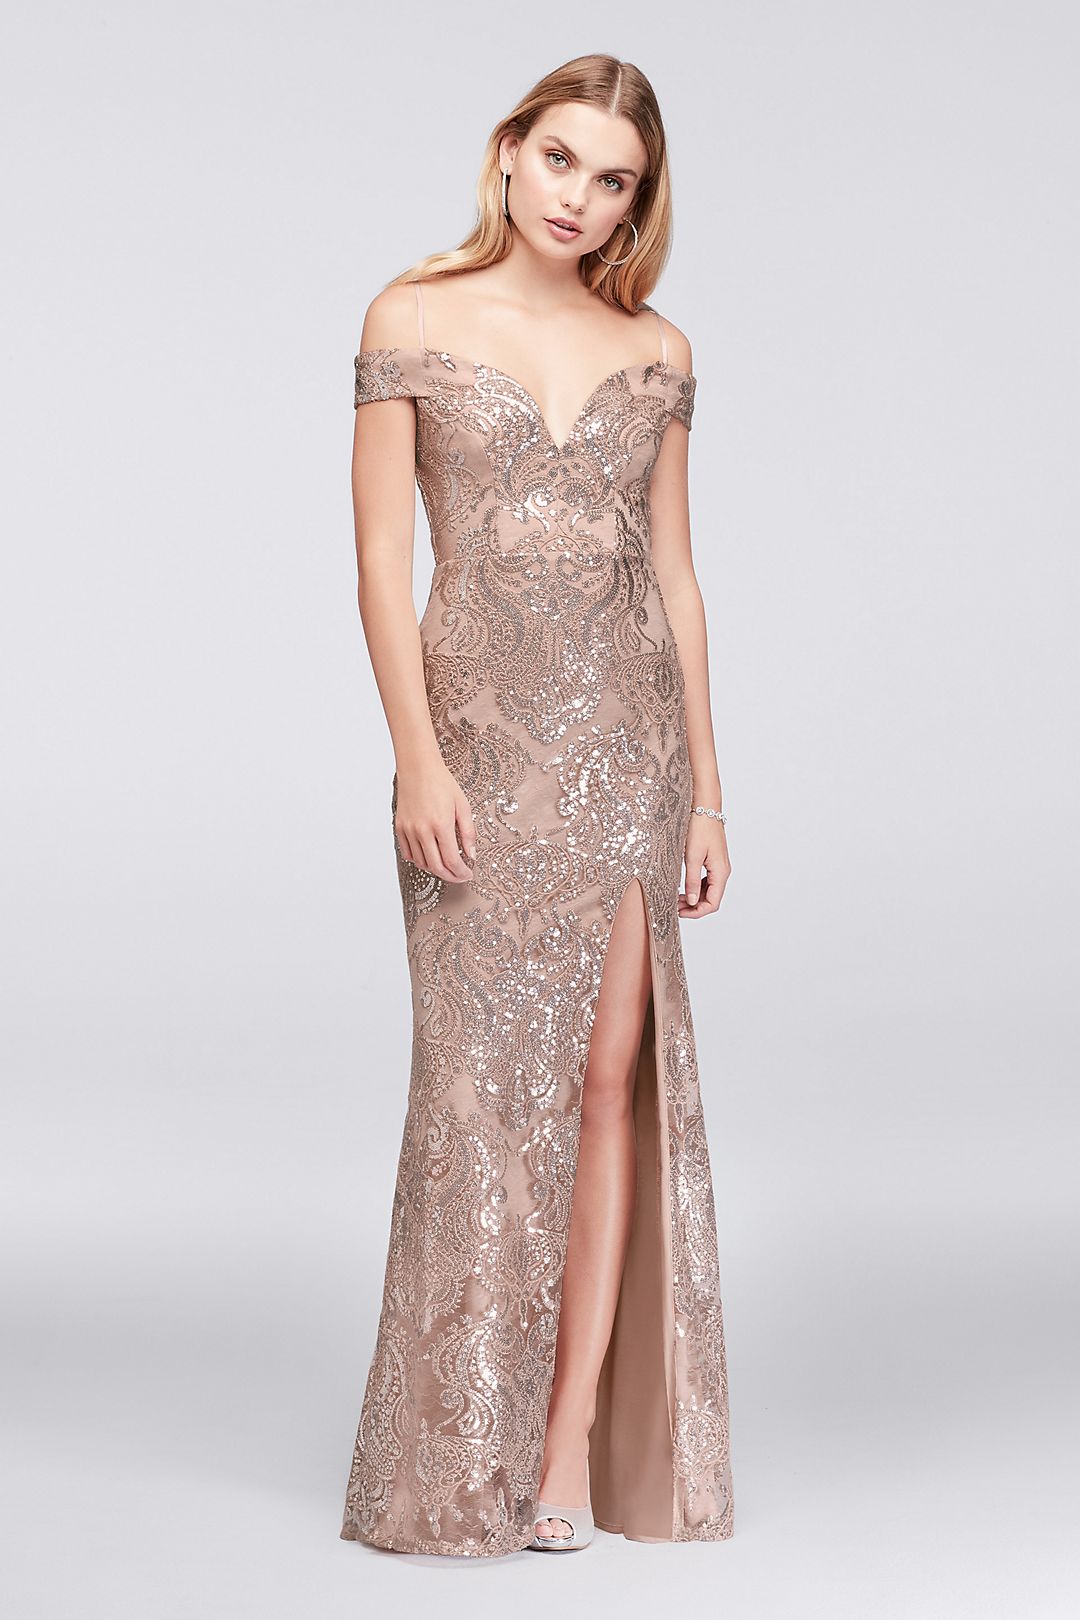 Off-The-Shoulder Lace Gown with Sequin Appliques Image 1